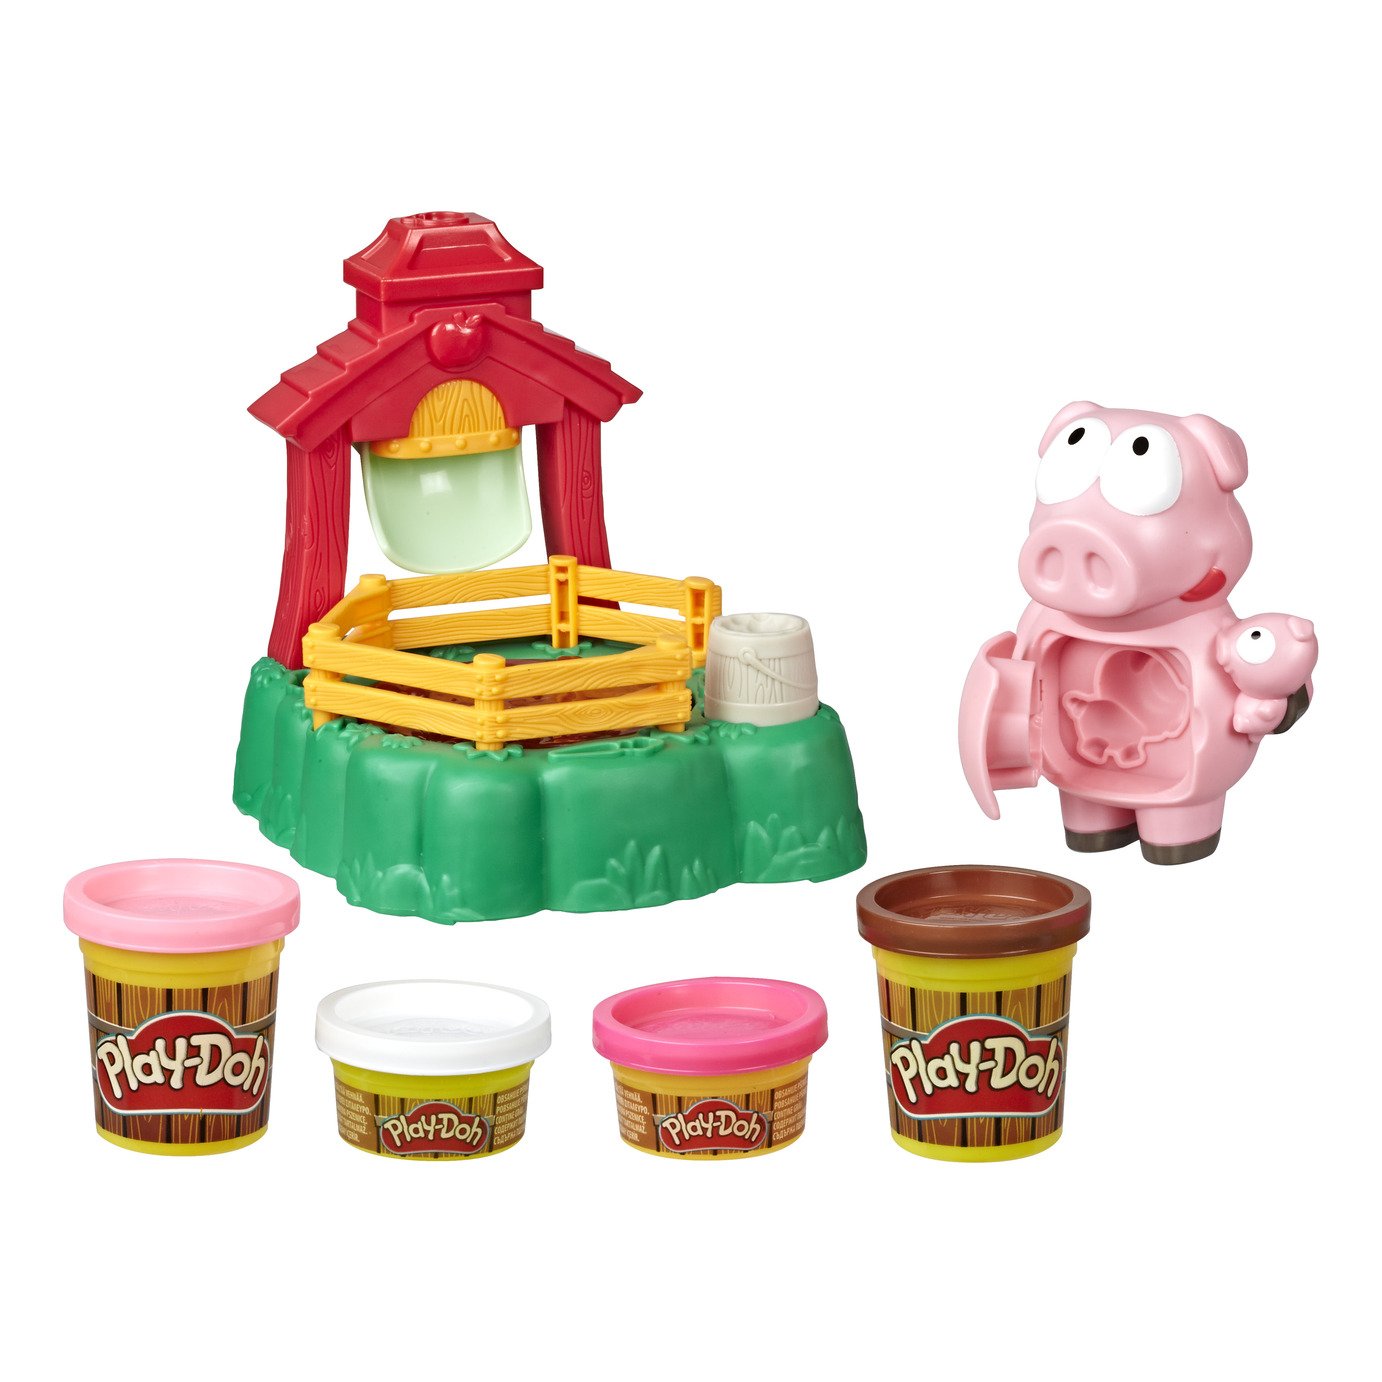 Play-Doh Animal, Pigsley and her Splashin' Pigs Farm Playset Review